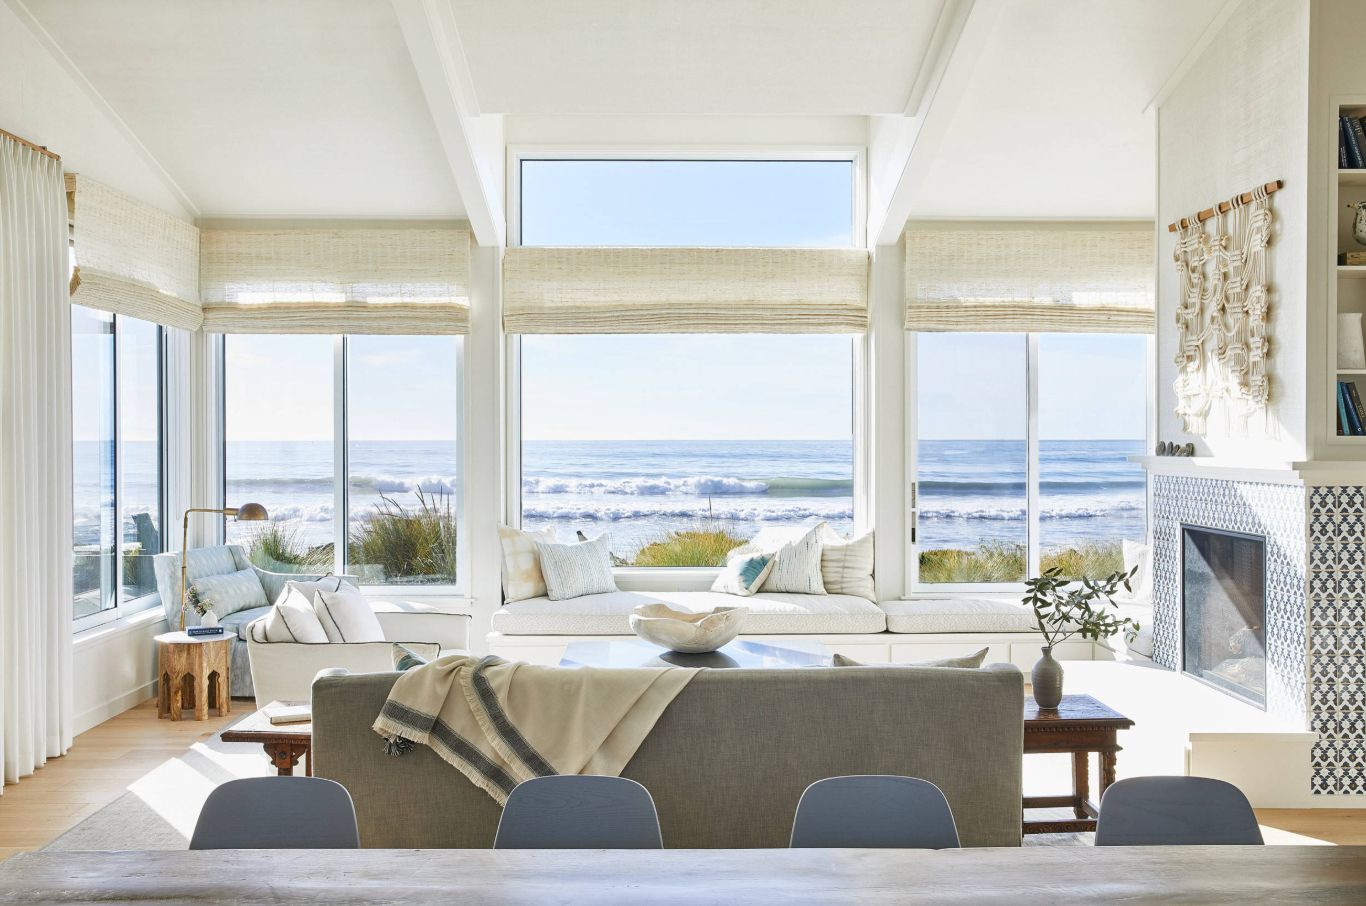 One would actually expect to see white furniture in an ocean-side vacation home